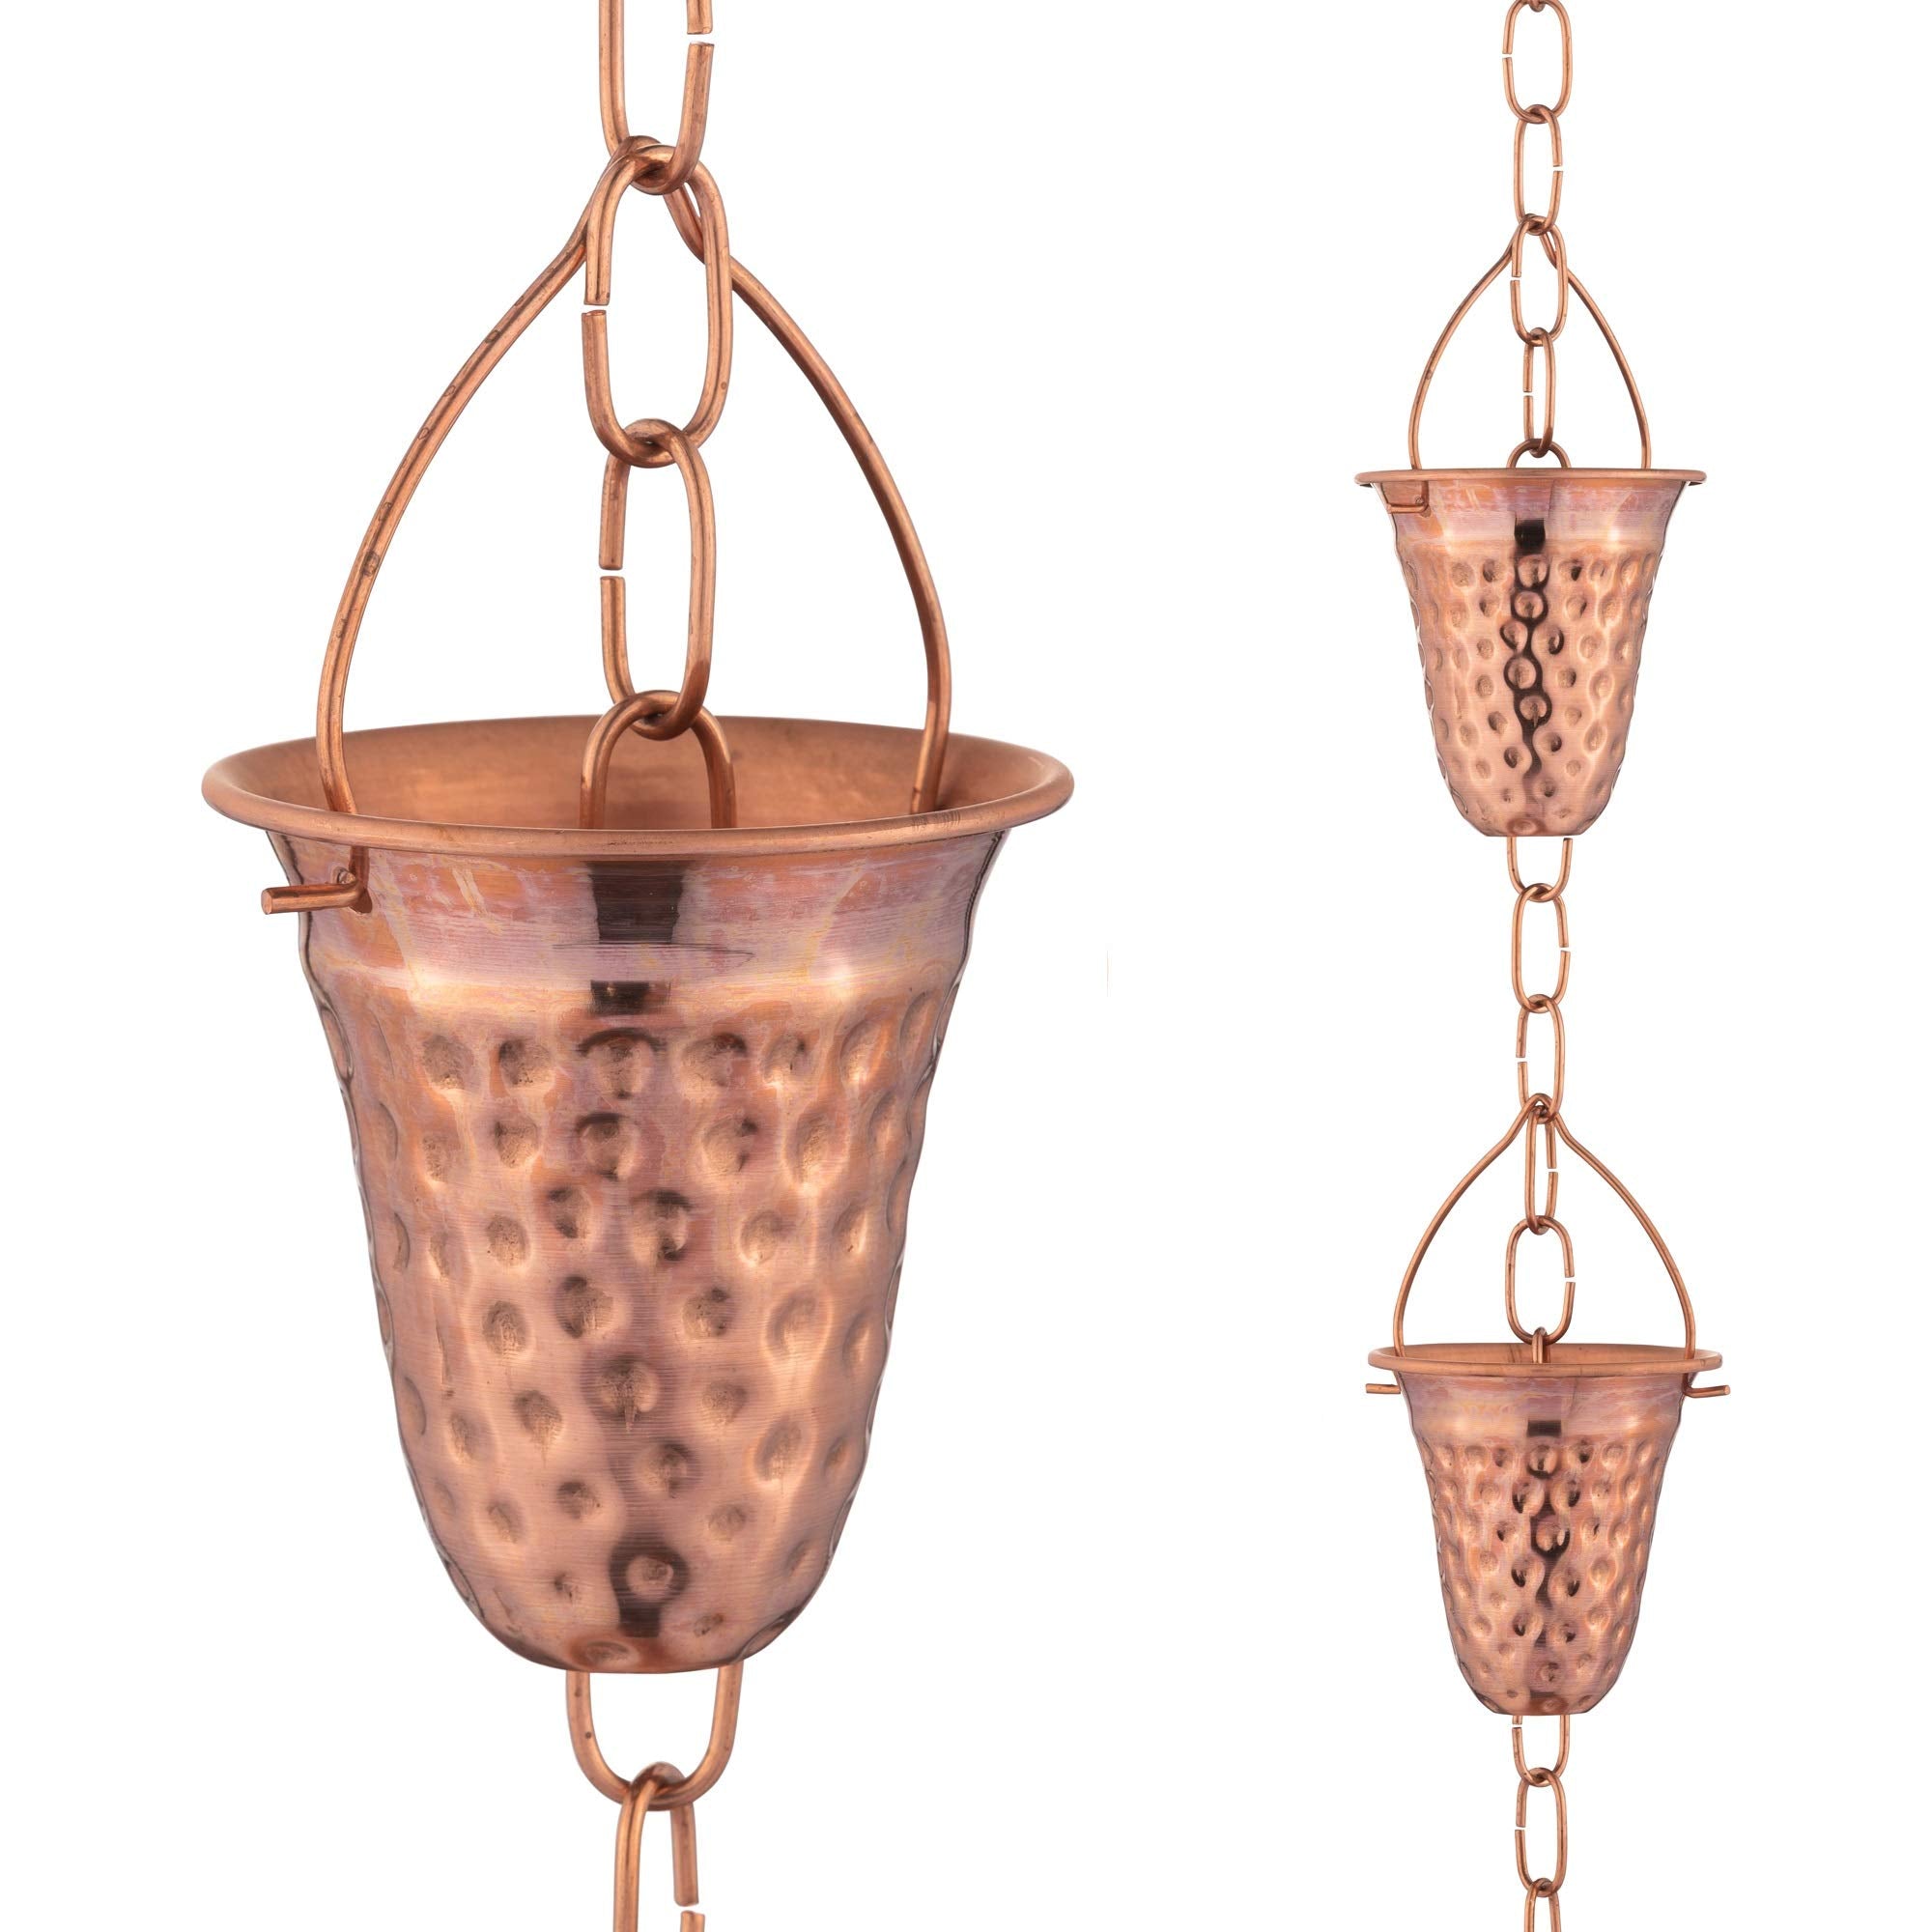 Marrgon Copper Hammered Rain Chain – Decorative Chimes & Cups Replace Gutter Downspout & Divert Water Away from Home for Stunning Fountain Display – for Universal Fit – Bell Style  - Like New